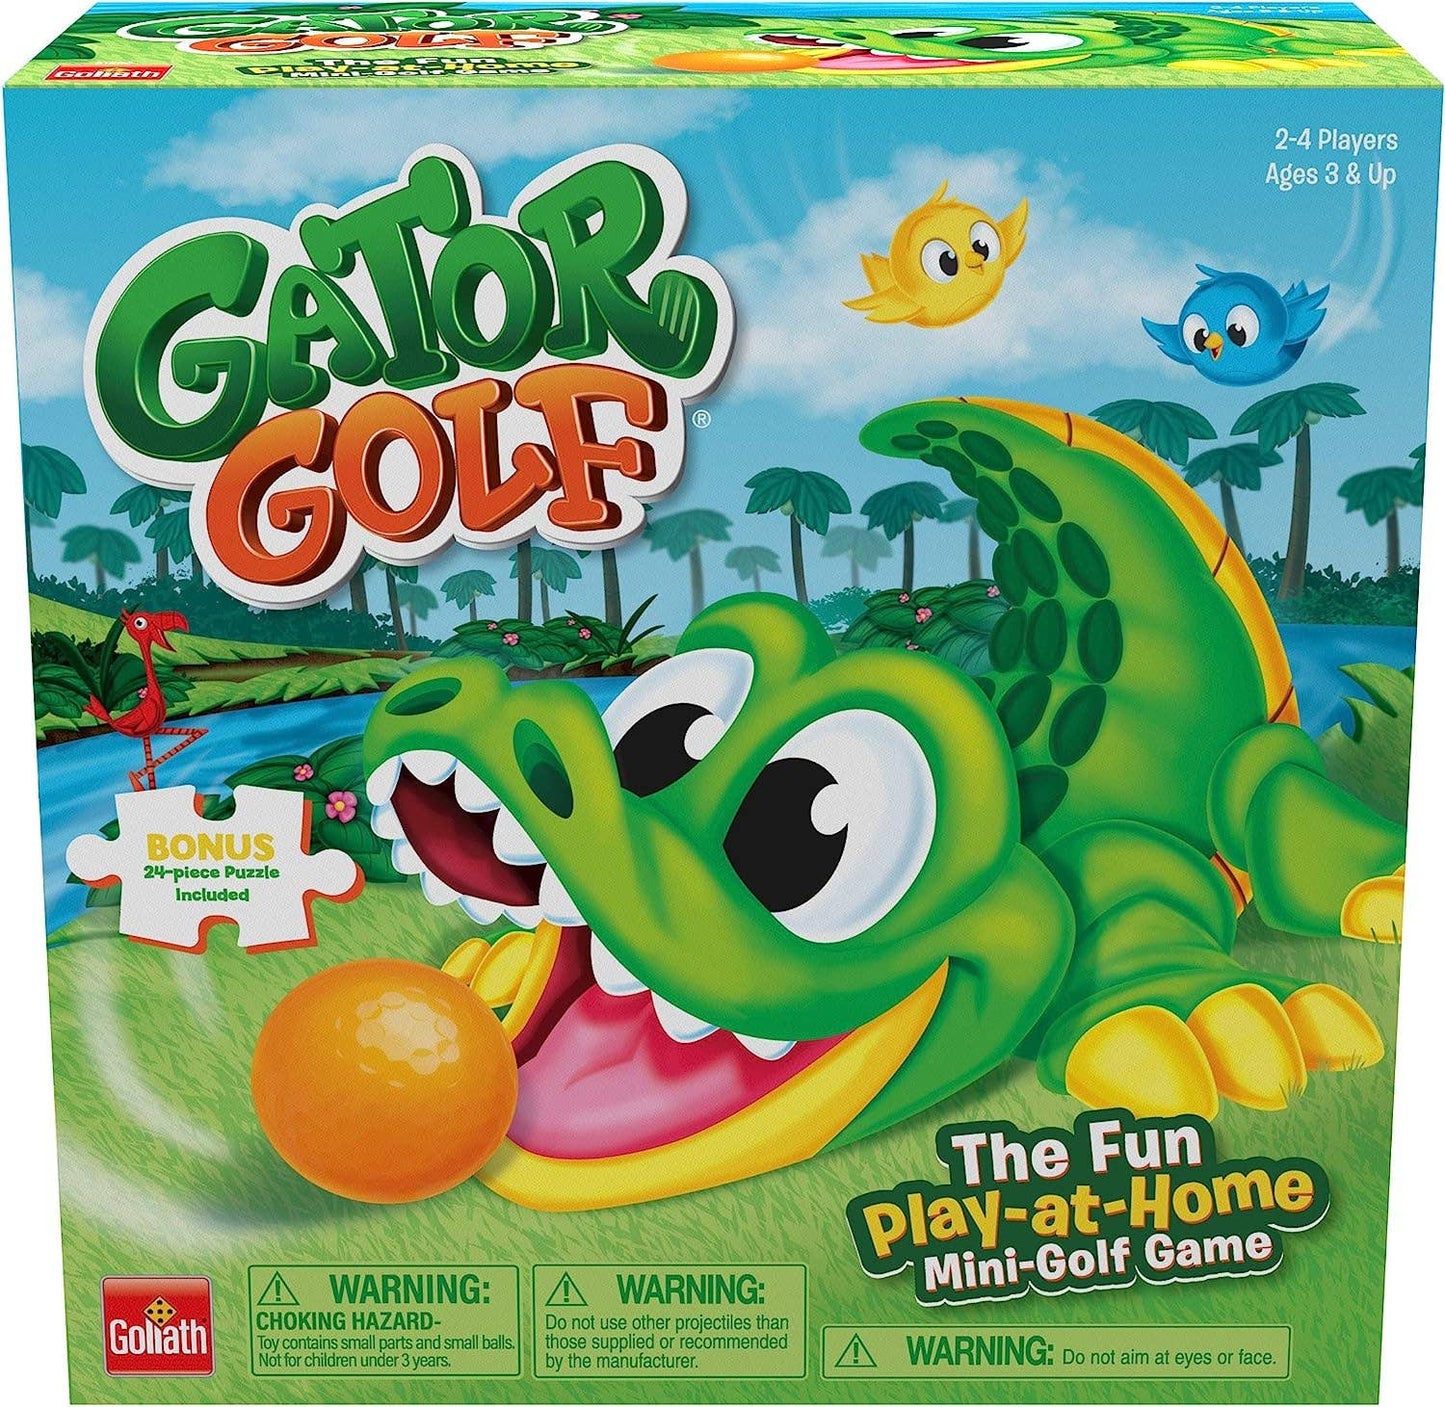 Gator Golf – Putt The Ball Into The Gator’s Mouth to Score